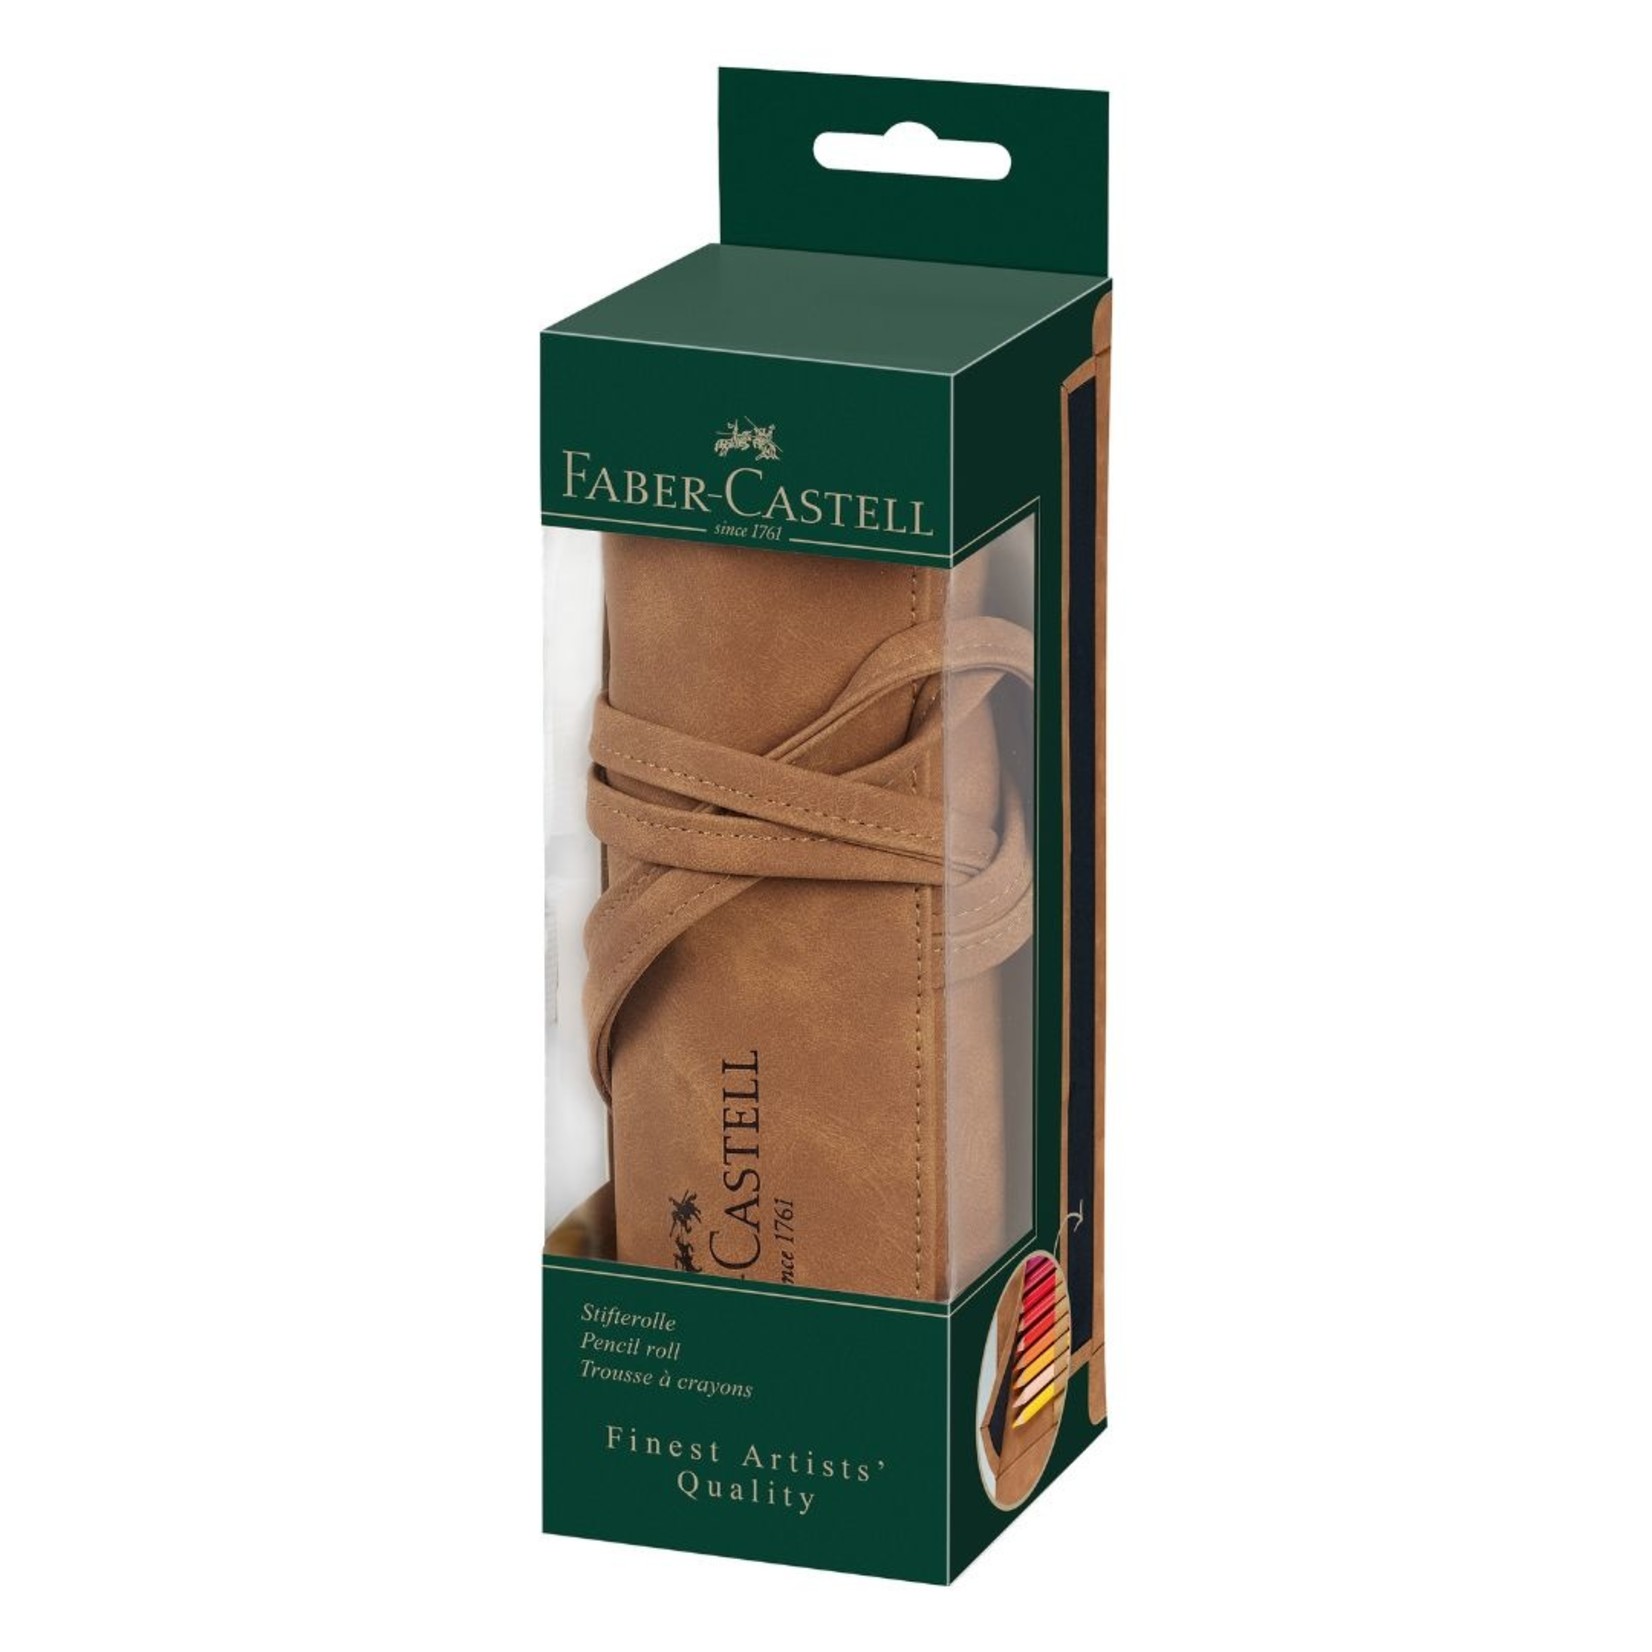 FABER CASTELL PENCIL ROLL TAN LEATHER 45/PC